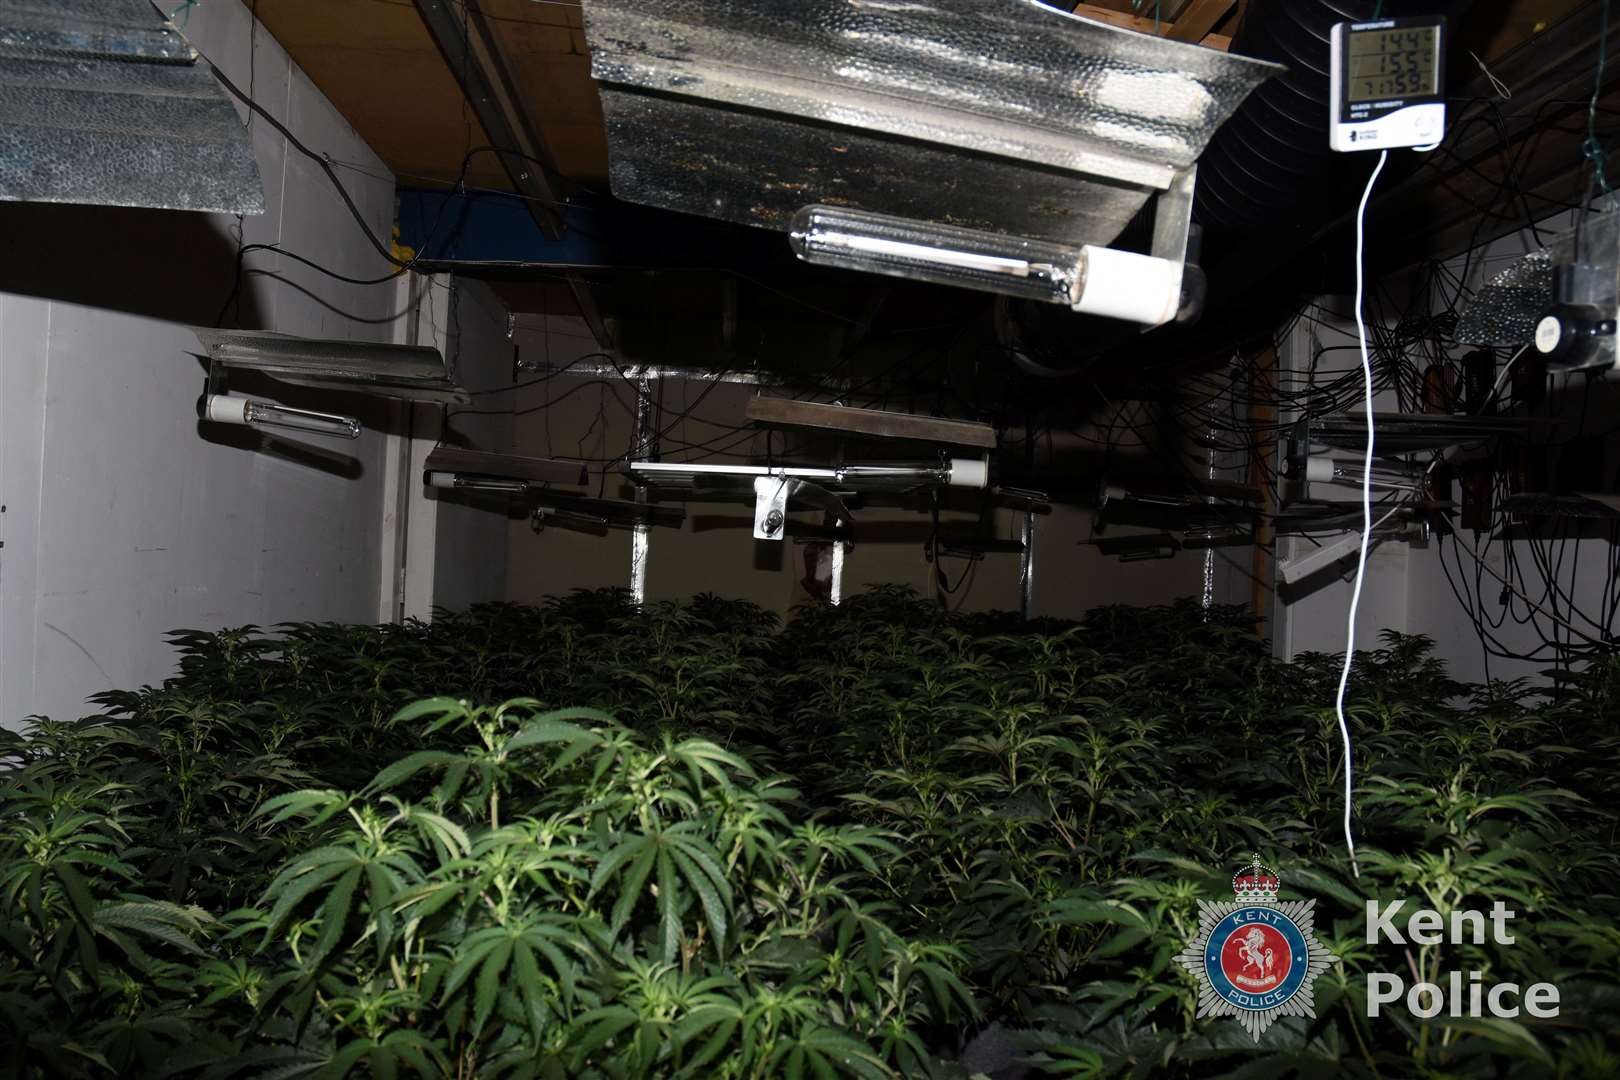 The cultivation was found in an industrial unit in Bethersden Road, Smarden